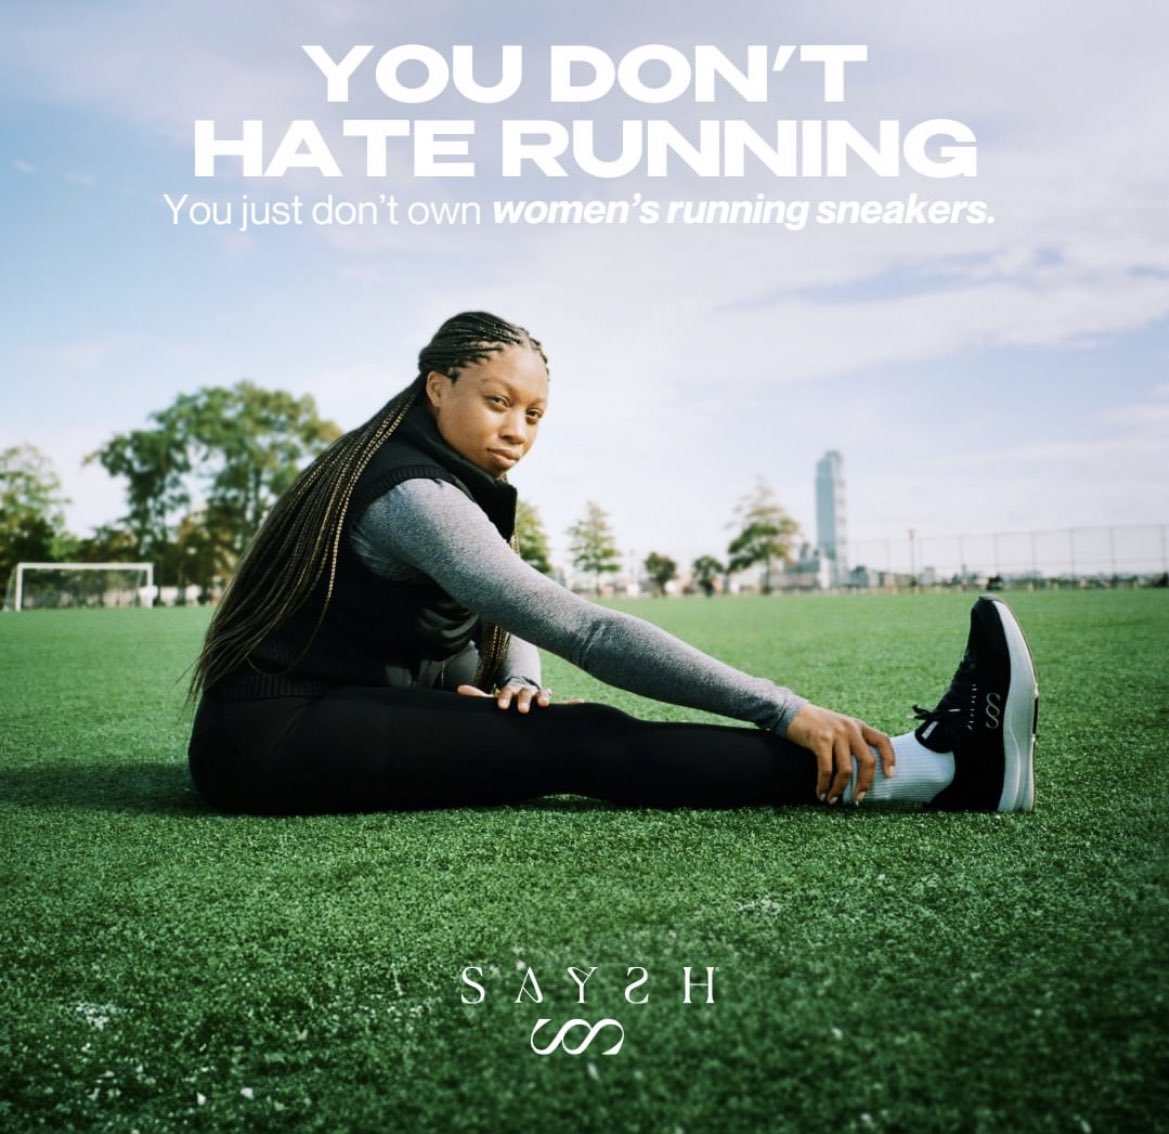 Running sneakers optimized for women.
Designed by Olympic gold medalist, Allyson Felix. Saysh is founded by her.